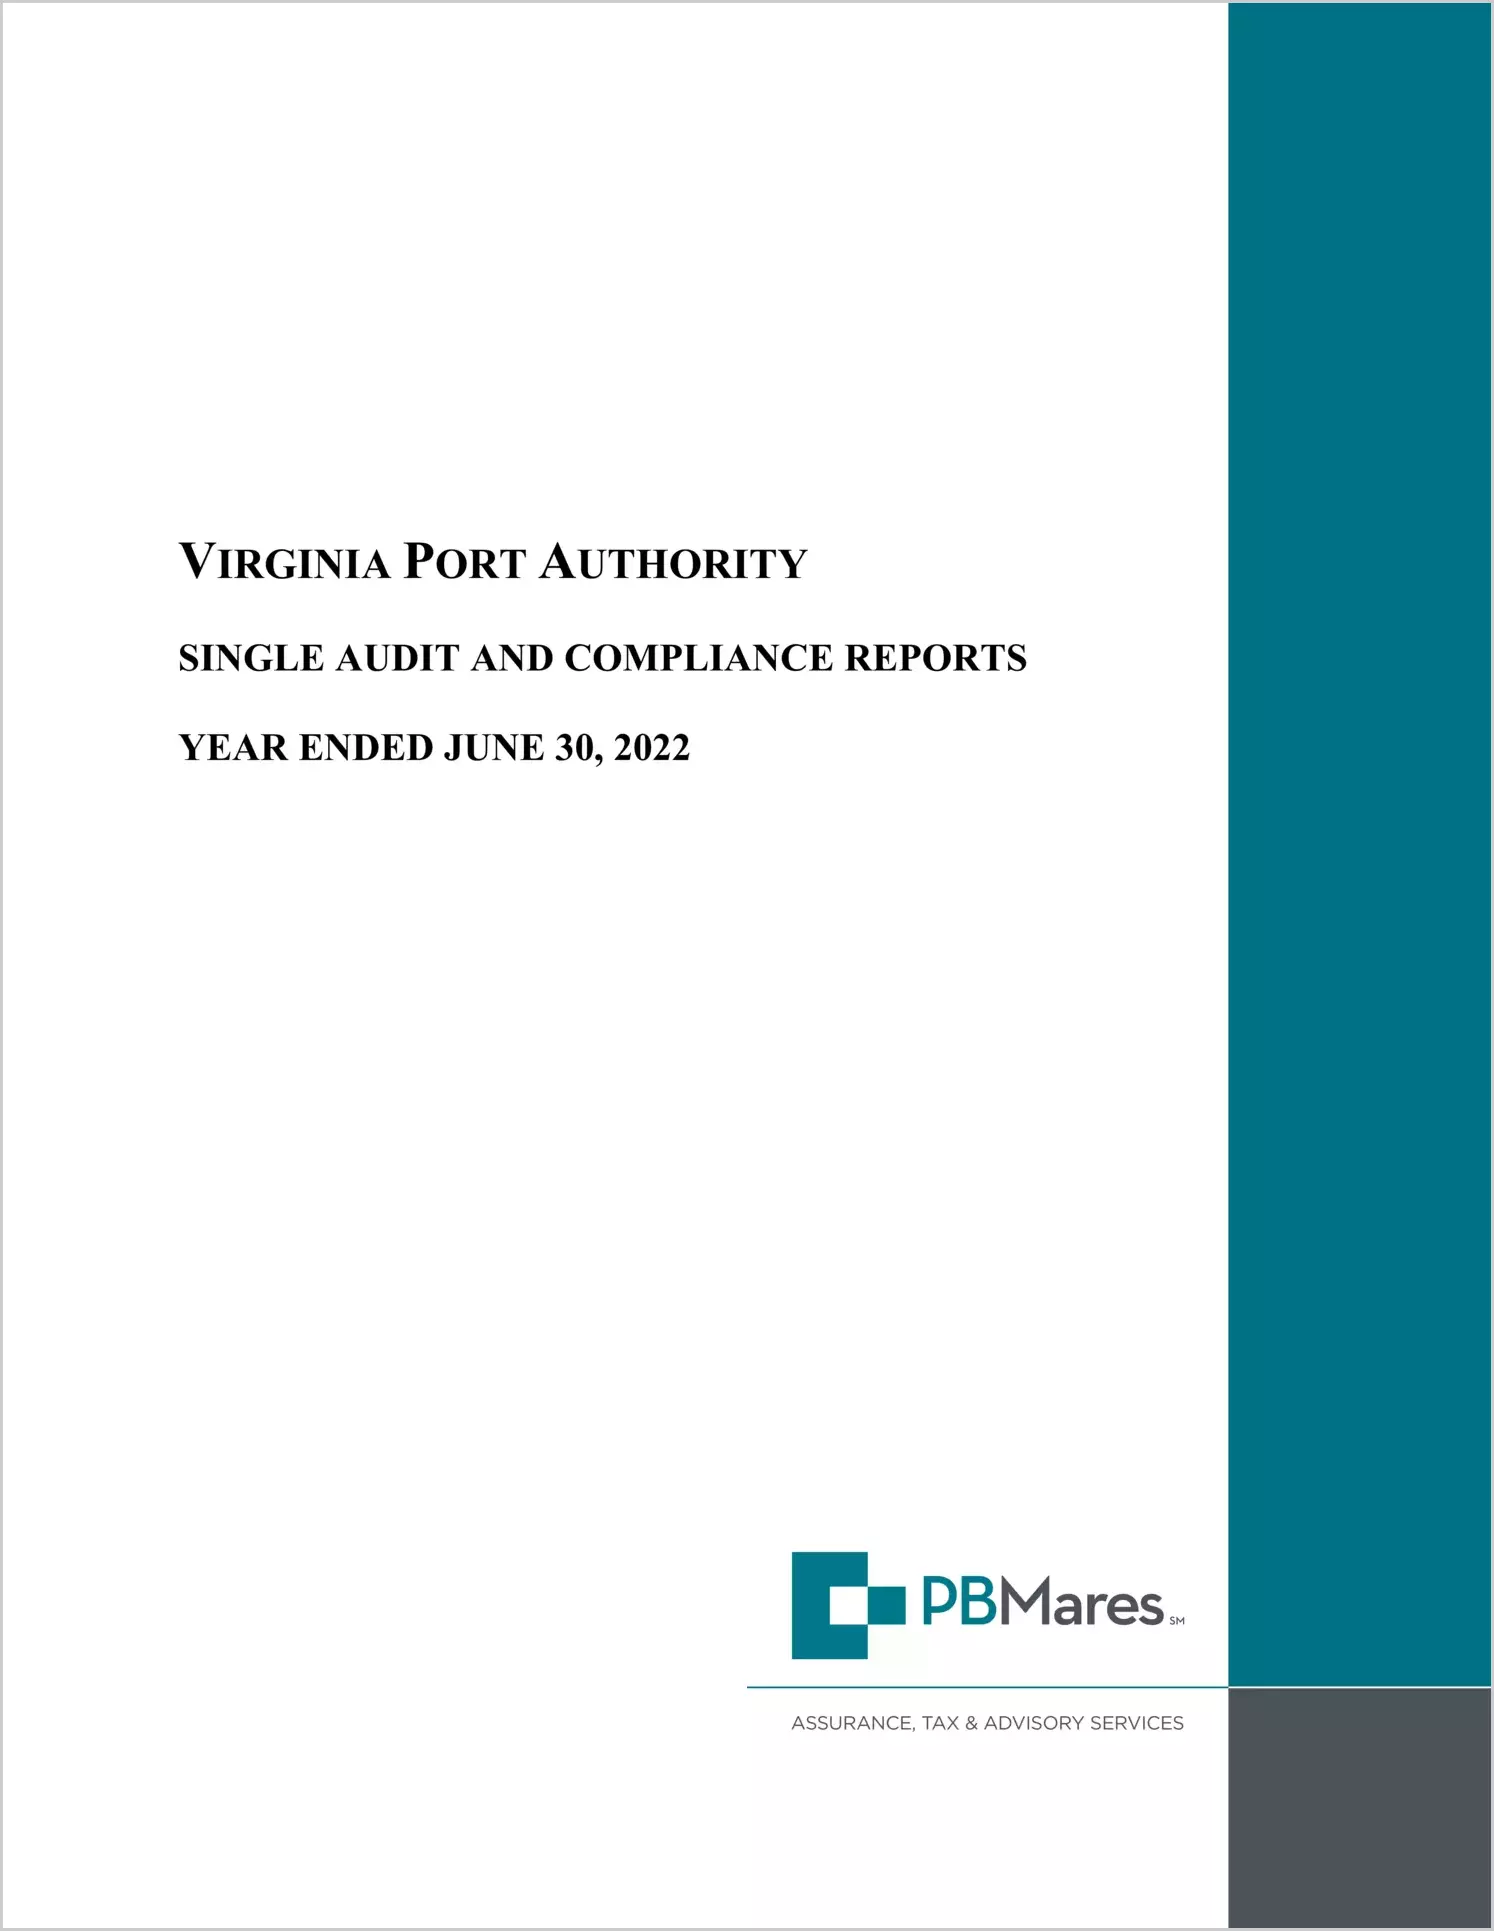 Virginia Port Authority for the year ended June 30, 2022